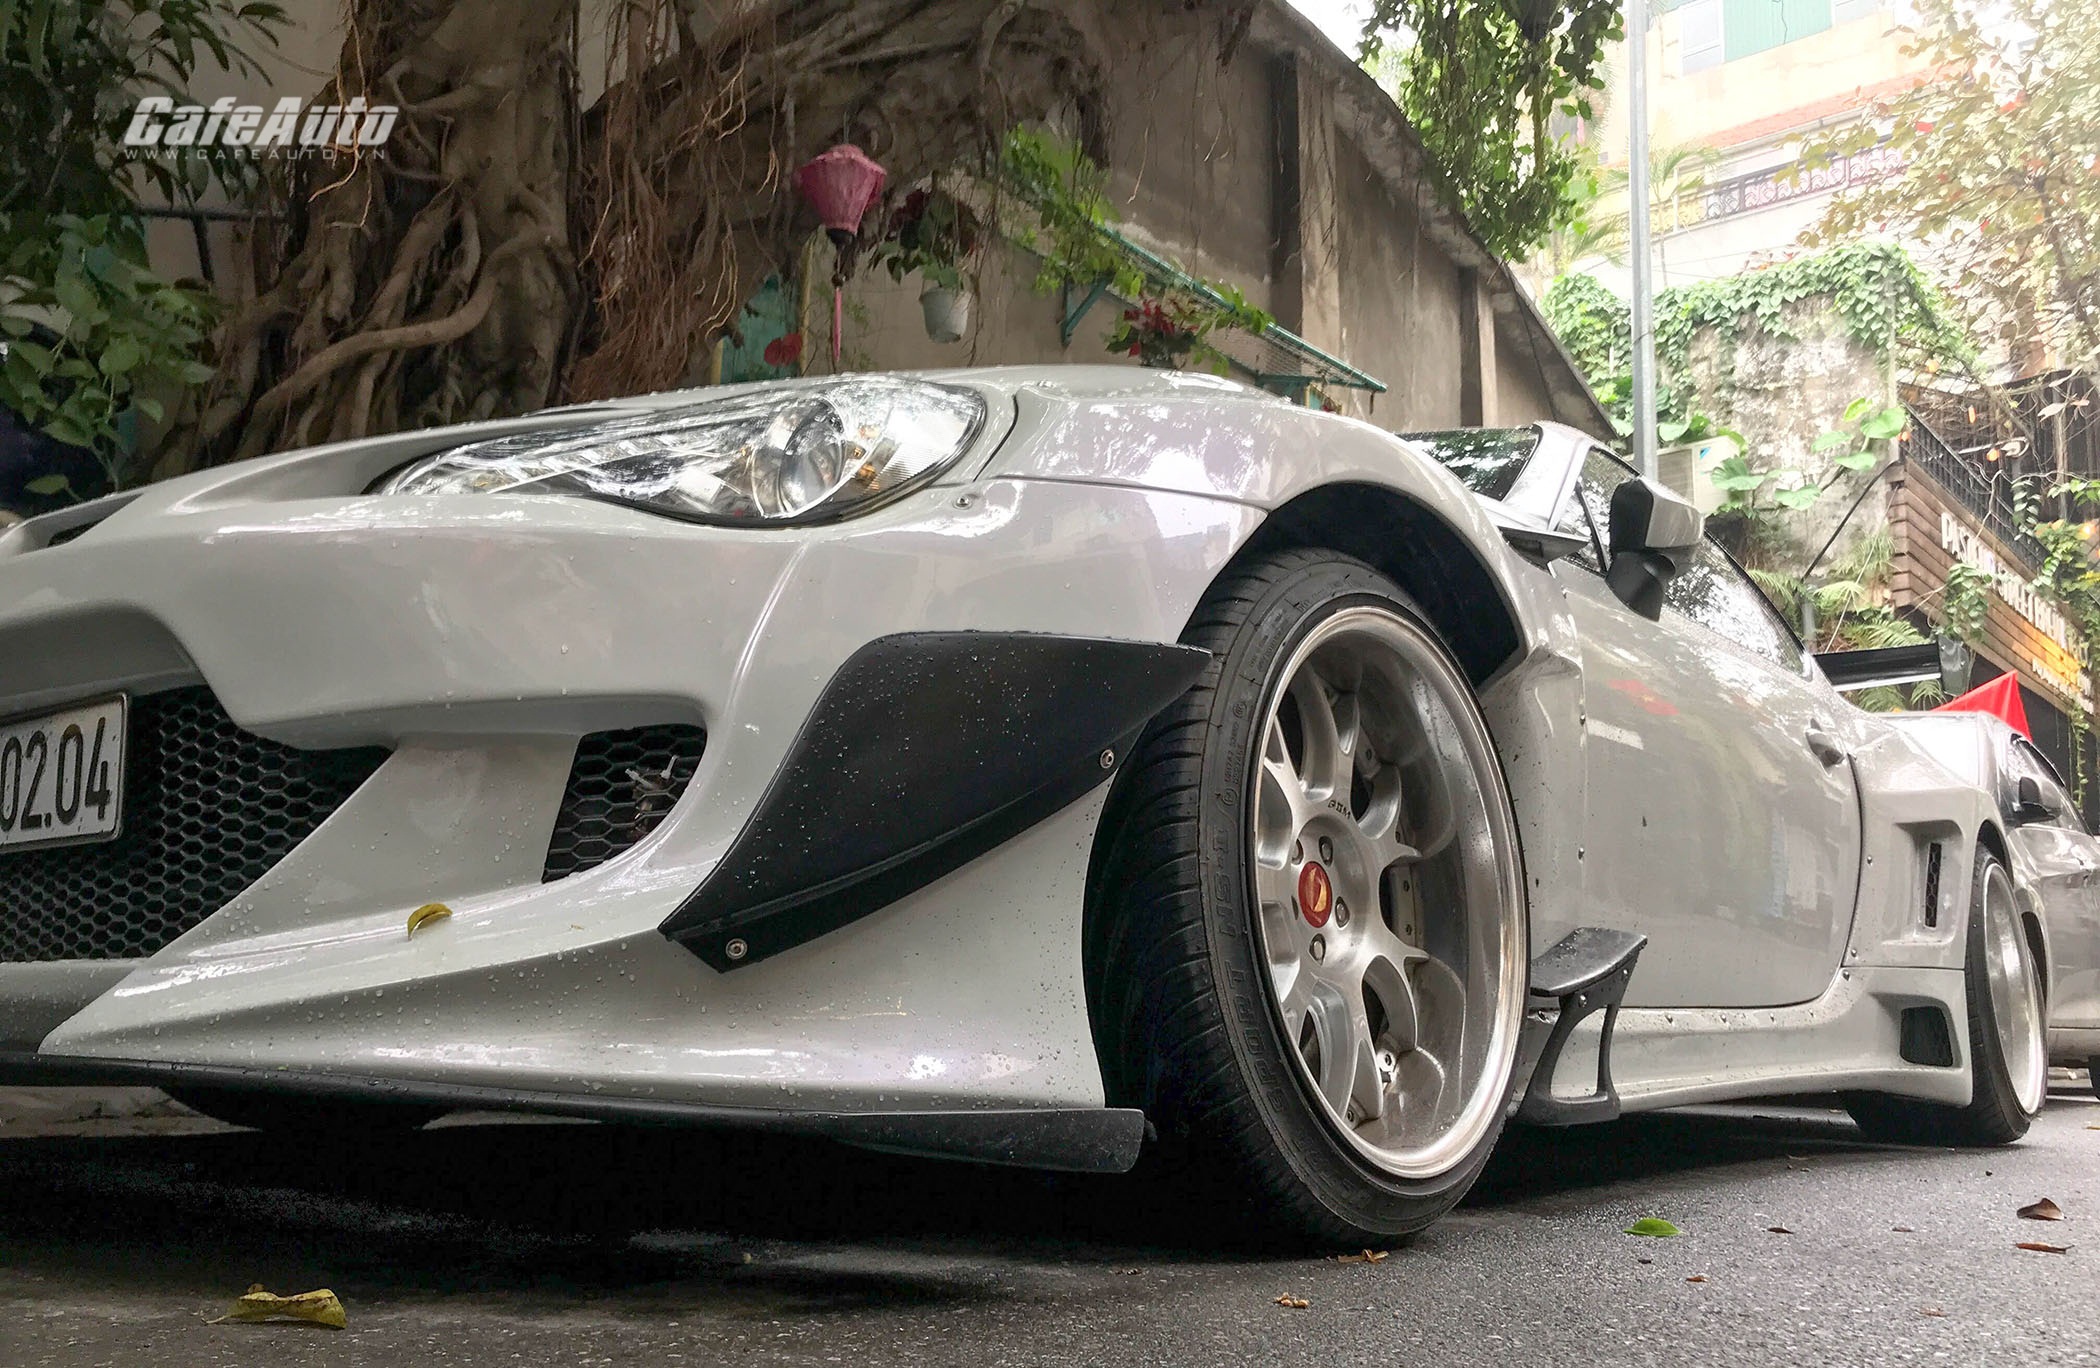 toyota86RB-cafeautovn-4